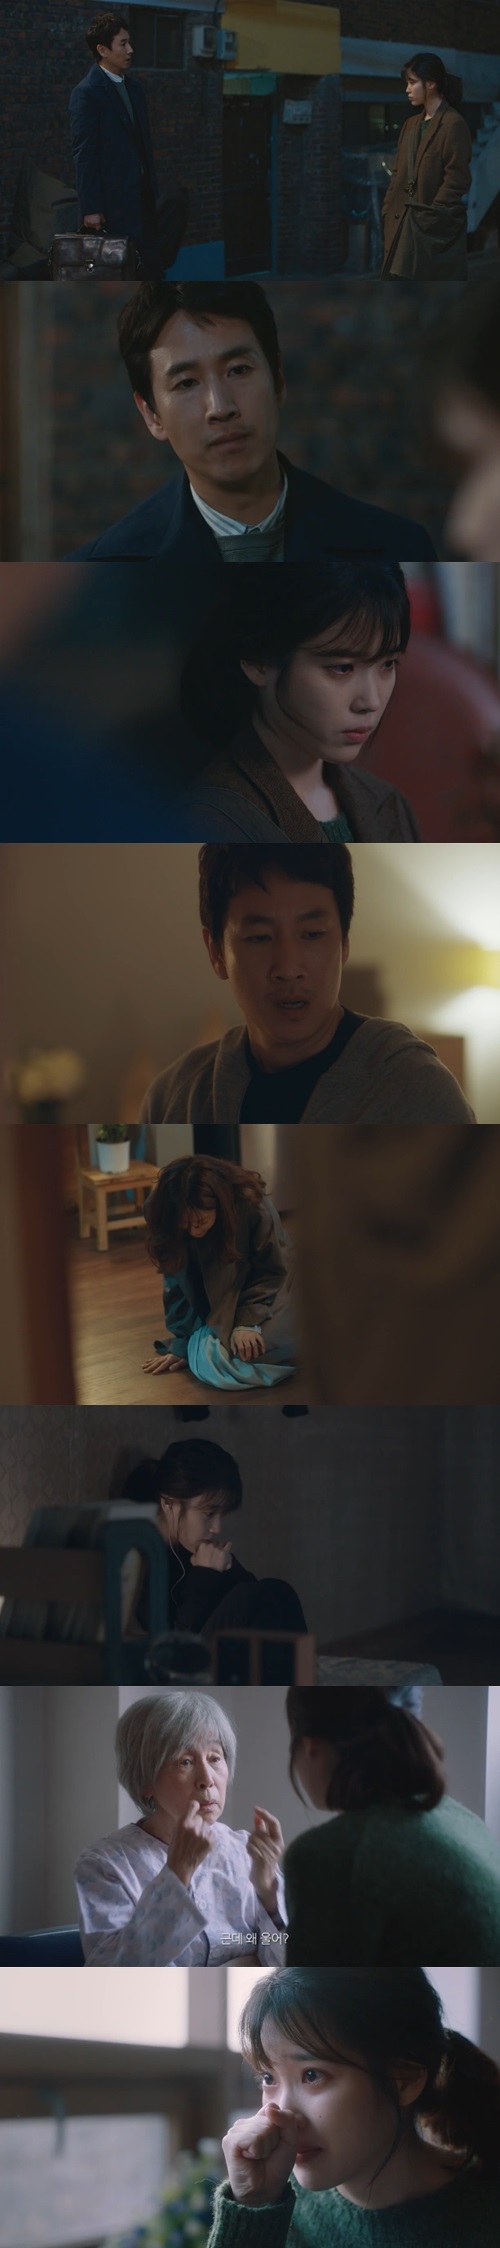 Tears from the IU rang out viewers.In the 11th episode of TVNs tree drama My Uncle, which aired on April 25, Lee Ji-an (IU) cried to her grandmother Bong-ae (Son Sook-soo) by telling Park Dong-hoon (Lee Sun Gyun).Park Dong-hoon began his preparations for a business promotion; by far Ijians presence in the mock interview was a problem.All the other executives began asking Park Dong-hoon what he was up to with Lee Ji-an and why he picked him up and what he did.I can not fire Ijian because Ijian is grudged or misuses him on the other side.Lee Ji-an also tapped all of the conversations.Do Joon-young (Kim Young-min) was nervous that Park Dong-hoon would become managing director, and asked Kang Yun Hee (Lee Ji-ah) to meet the meeting at the hotel as a chance meeting.How long do you think you can continue this brazen act in front of someone who knows Ive been cheating on you? said Kang.Park Dong-hoon overheard the call.Do Joon-yeong also called Lee Ji-an and asked him how far he liked the operation, and said he liked it and was hit in the back of the head.However, Do Joon-young, who heard the situation at the time of the recording, noticed that Lee Ji-an really liked Park Dong-hoon and said, Why do women like Park Dong-hoon?To Do Jun-young, Lee Ji-an said, I will sleep with Park Dong-hoon.Park Dong-hoon went to his friend, Deok (Park Hae-jun), who became a monk with a monthly salary in a frustrated heart, and he advised, Live with shame.The next day, Park Dong-hoon recalled the advice of humility and went to Do Jun-youngs CEOs office and said, Do not let Yun Hee know what I know.I asked him to do it with a note that he wanted to punch him in front of the chairman. As the turmoil broke out and people gathered, Do Joon-young told Wang Jeon-moo (National Director of Korea), Why are you following people and taking strange pictures?I just happened to meet with the college motivator and talked about it for about ten minutes, he said.That night, Yun Hee tried to bring up the affair first with her husband, Park Dong-hoon, but Park Dong-hoon avoided the conversation.